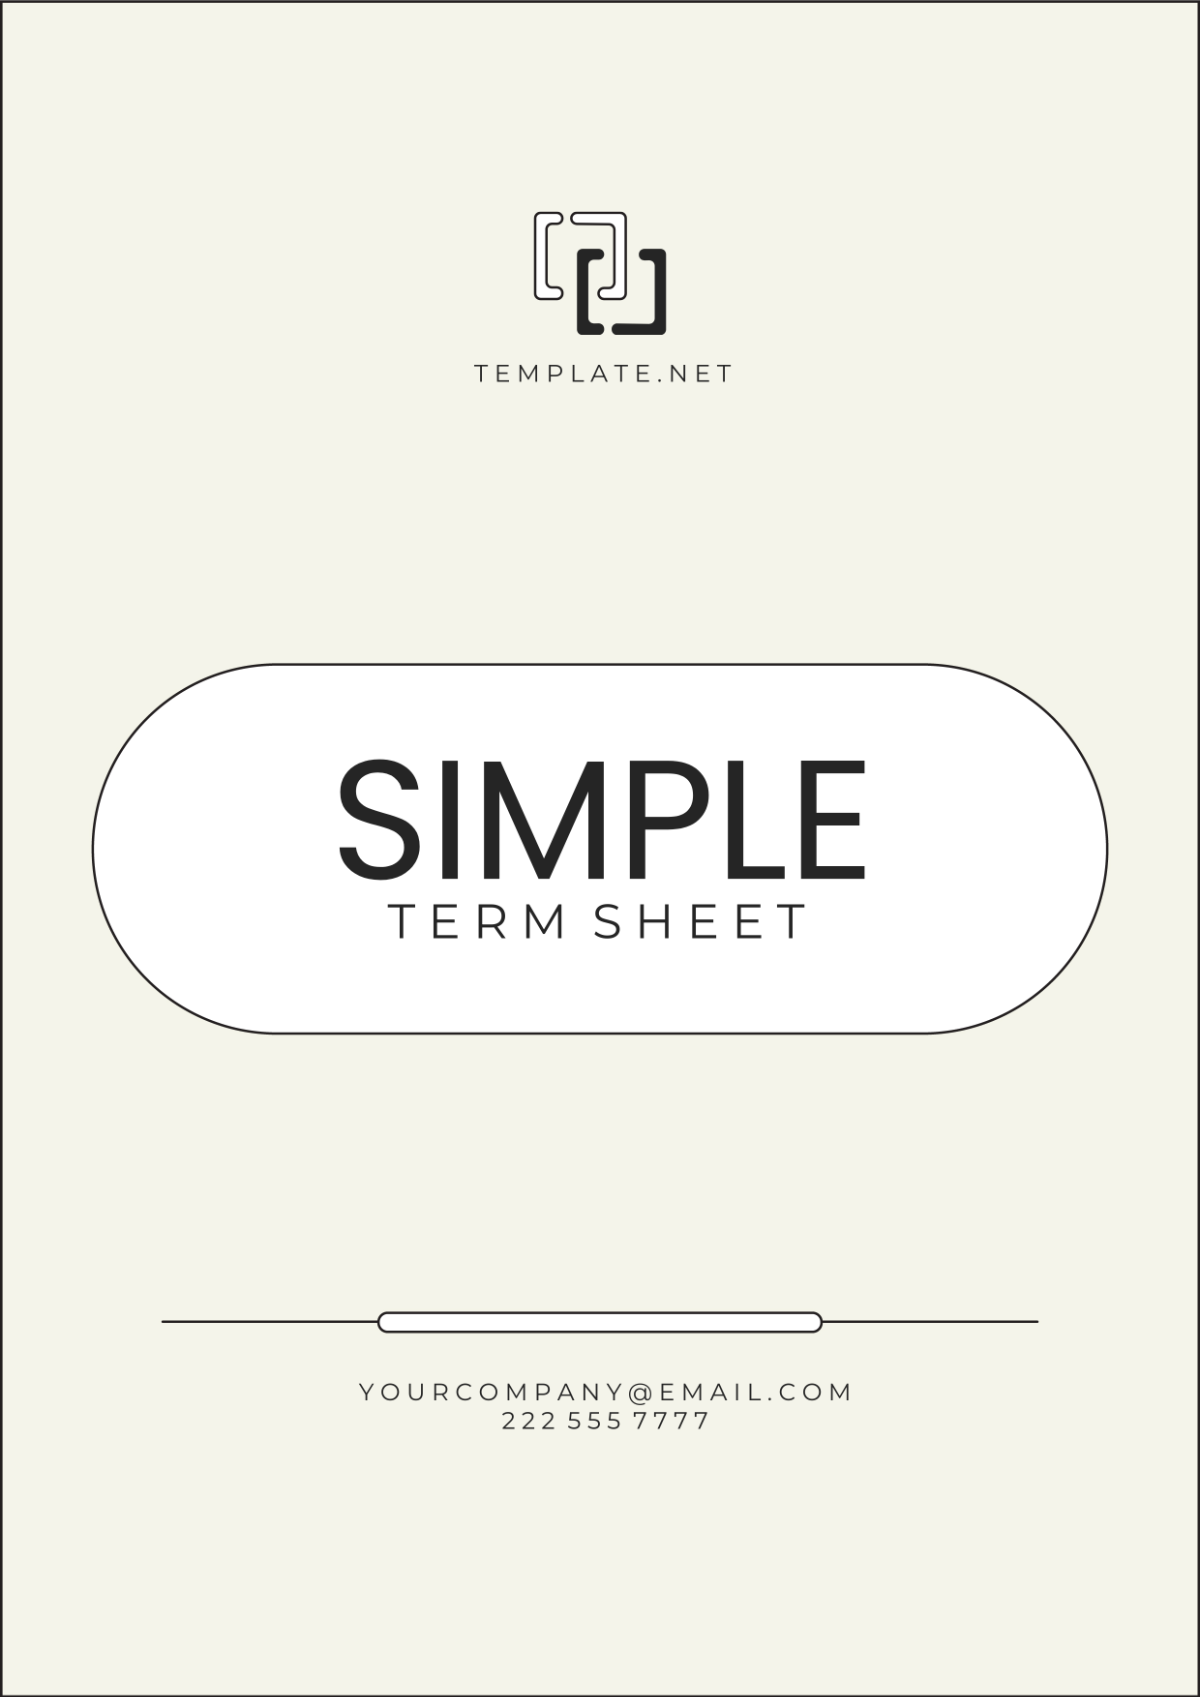 Simple Term Sheet Cover Page